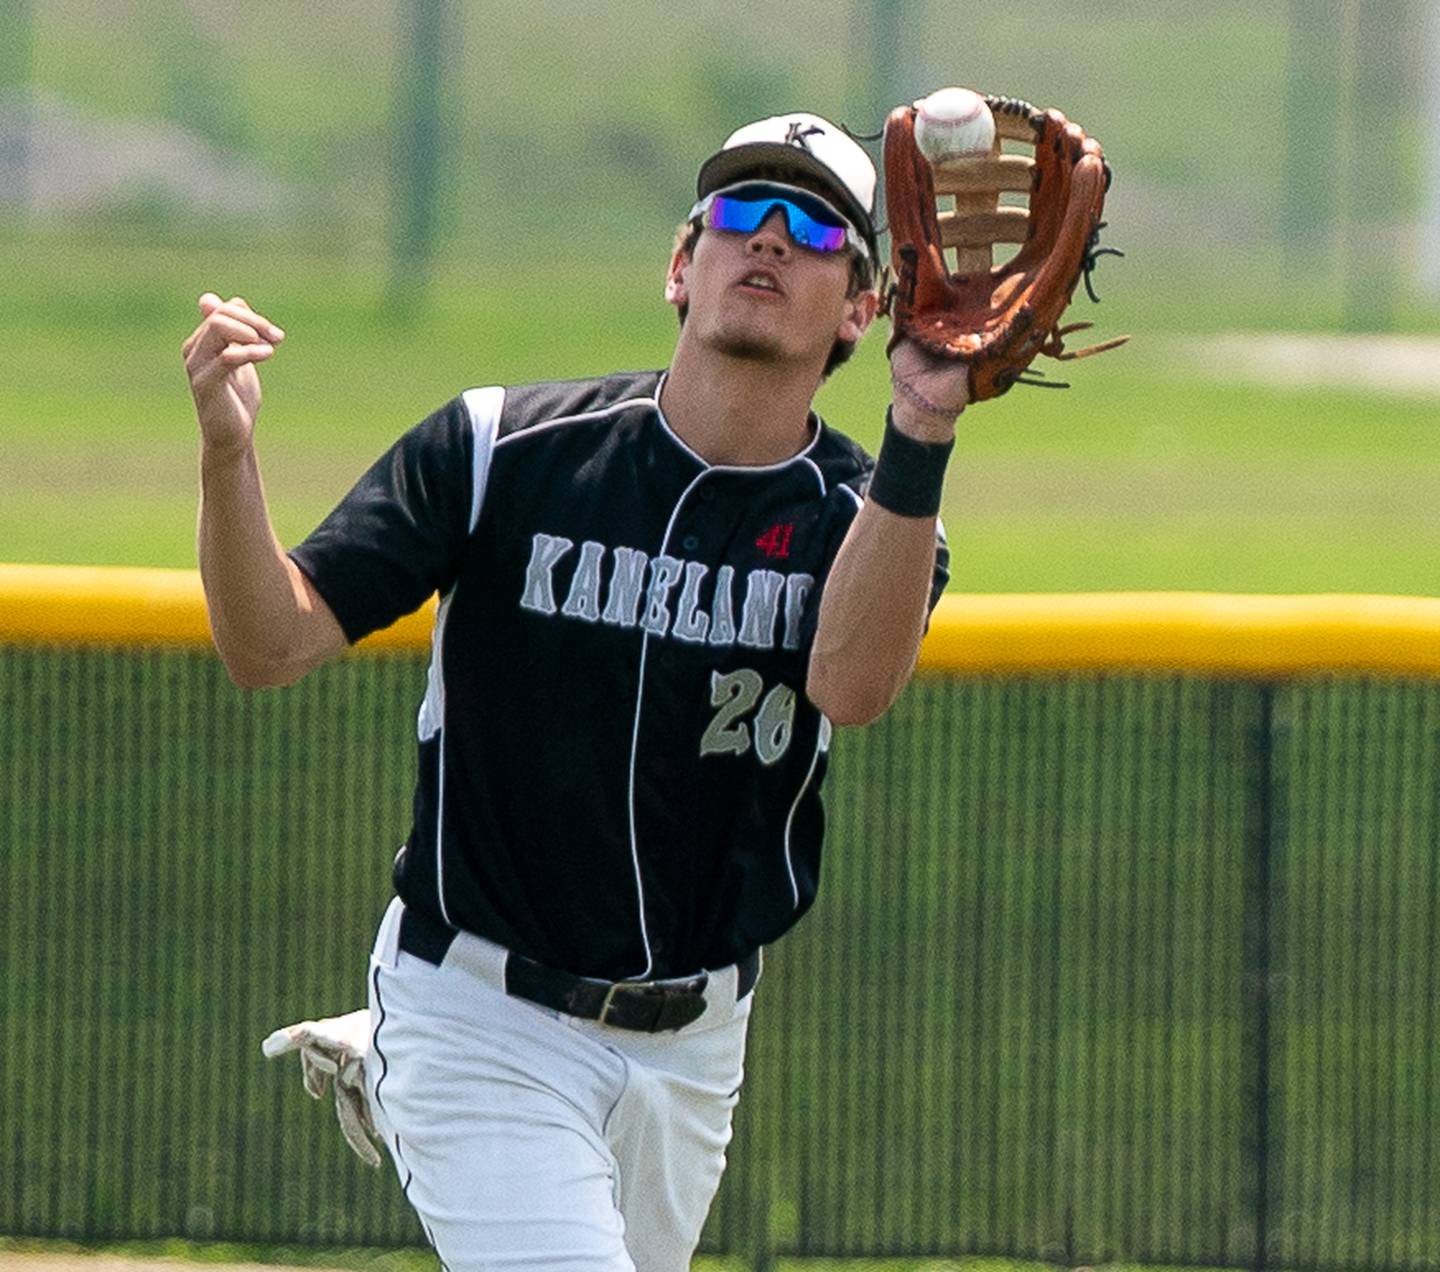 Kaneland’s Parker Violett (26) catches a fly-ball for an out against Benet during the Class 3A Kaneland Regional baseball final at Kaneland High School in Maple Park on Monday, May 30, 2022.